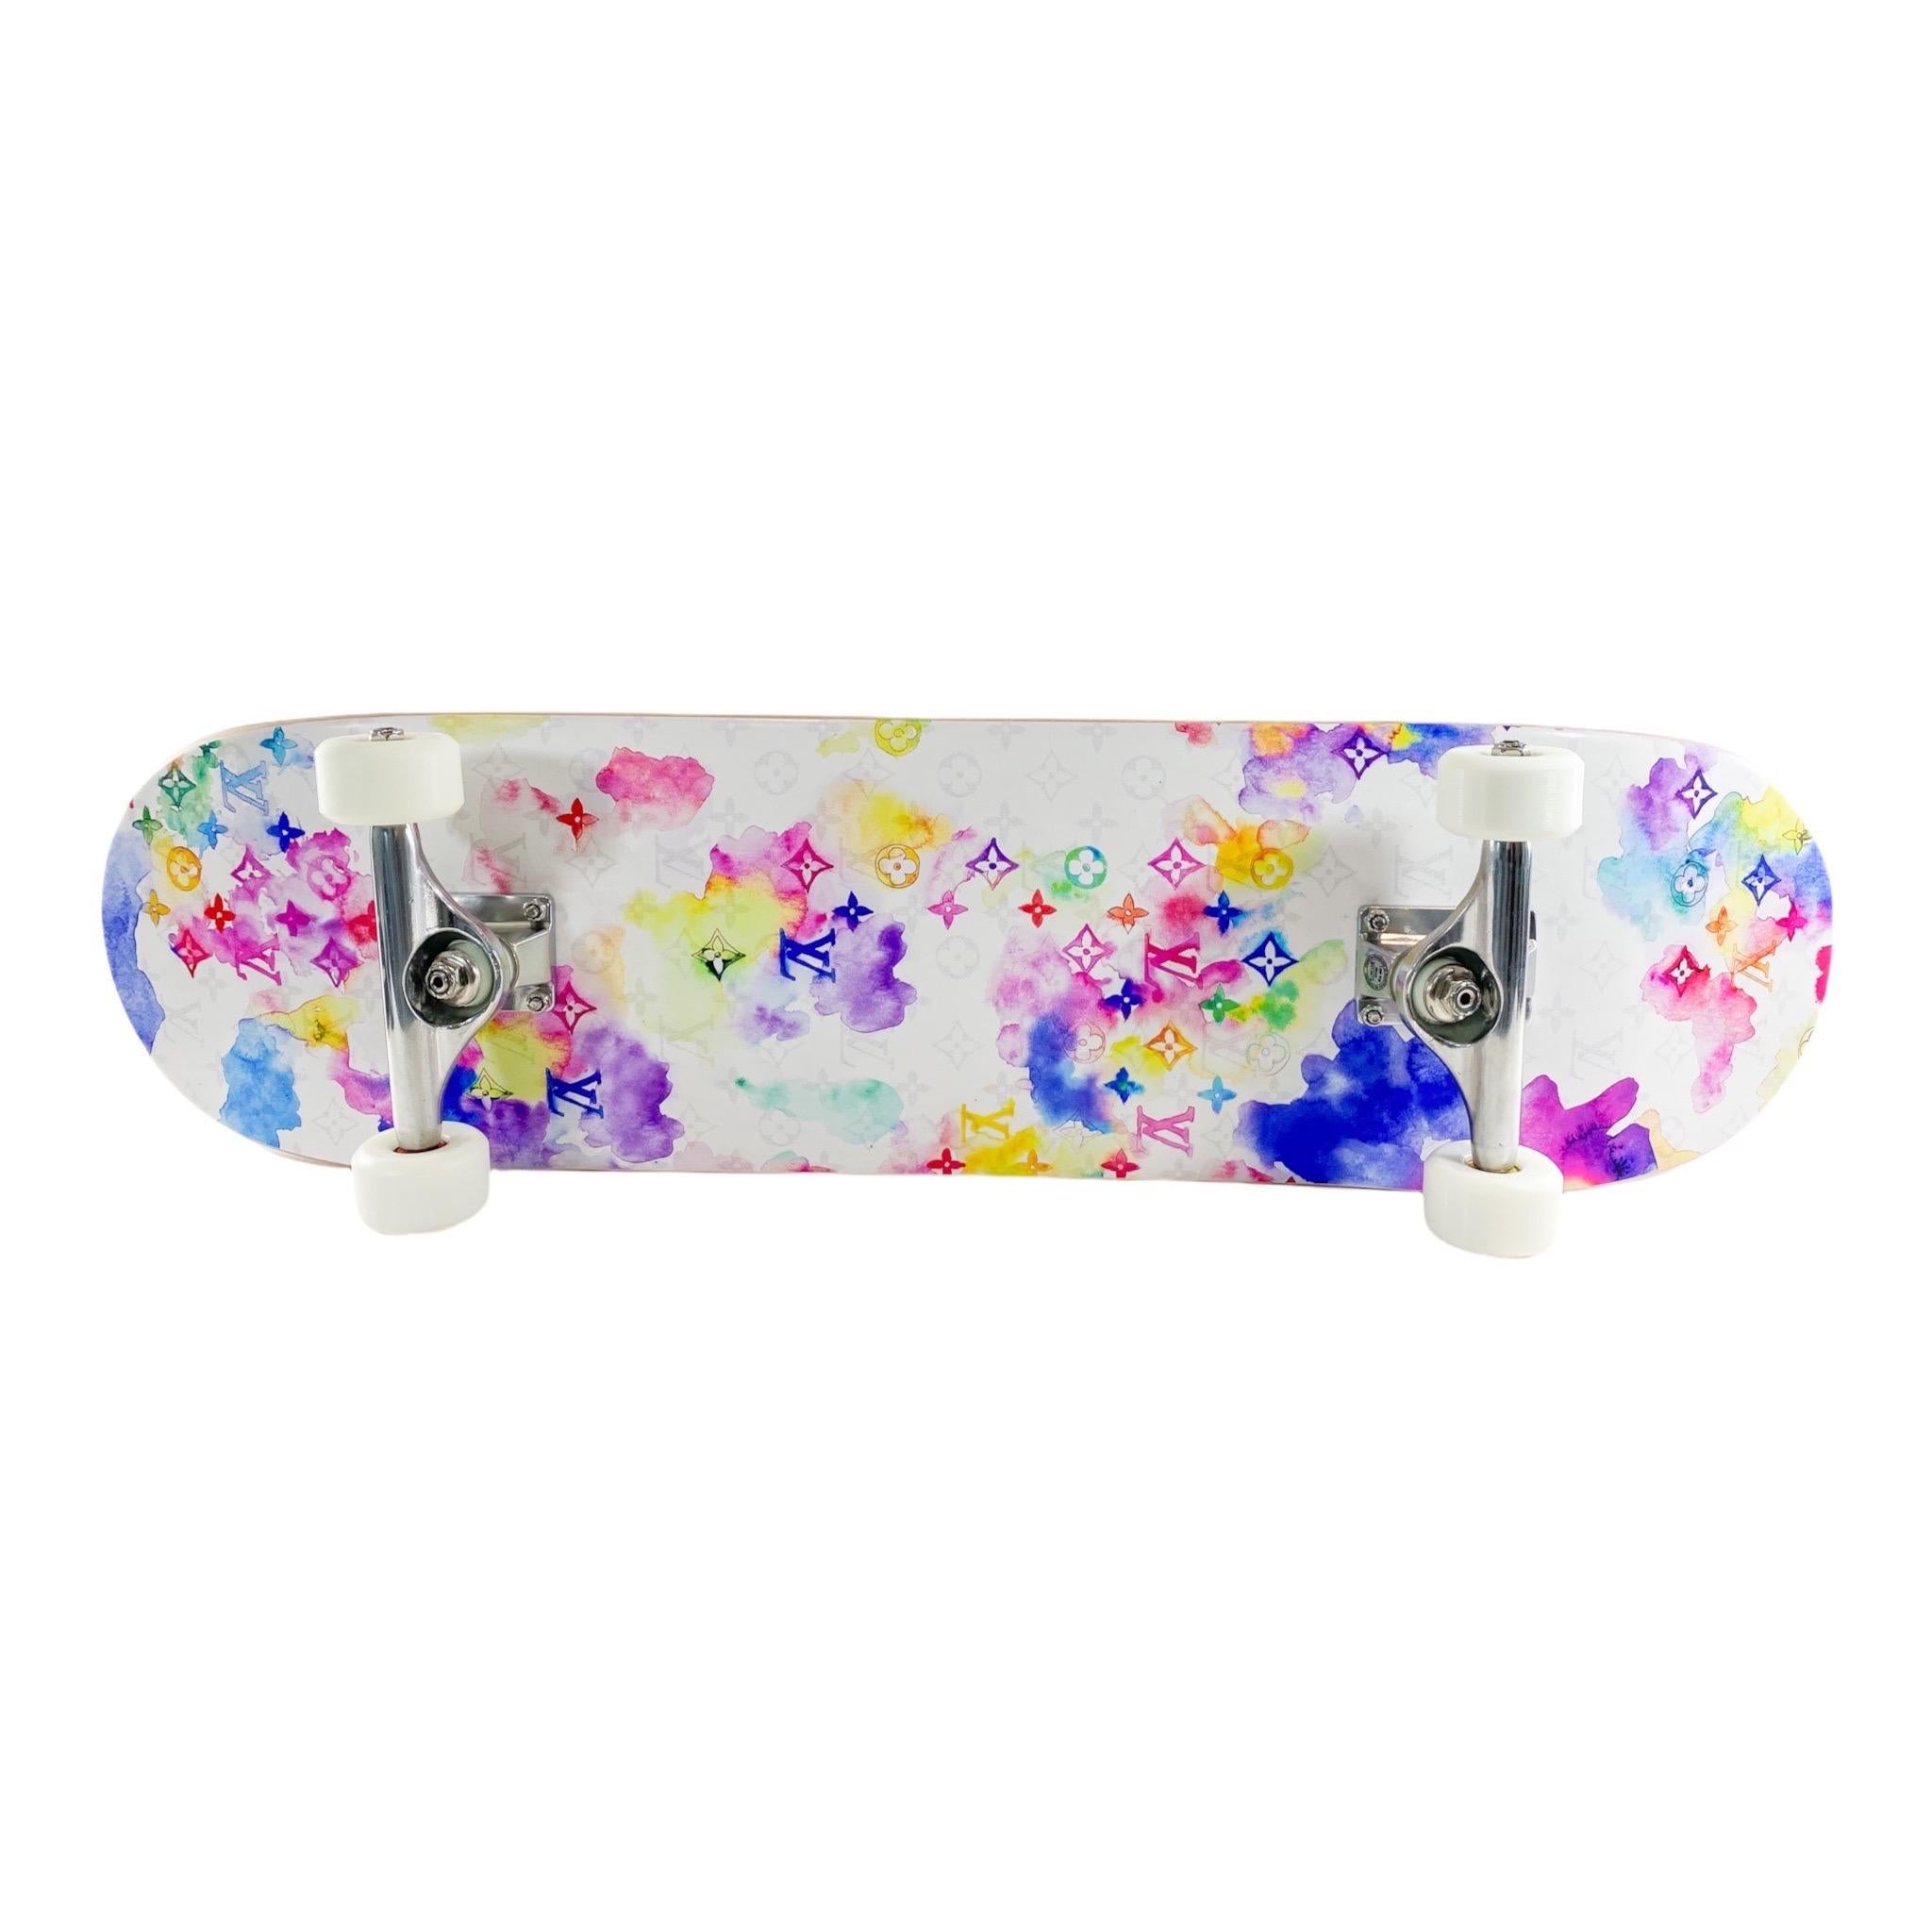 Consign of the Times presents this brand new authentic Louis Vuitton Water Color Skateboard. This skateboard features watercolor print on top with the Louis Vuitton monogram on the bottom. The four wheels all have the Louis Vuitton logo